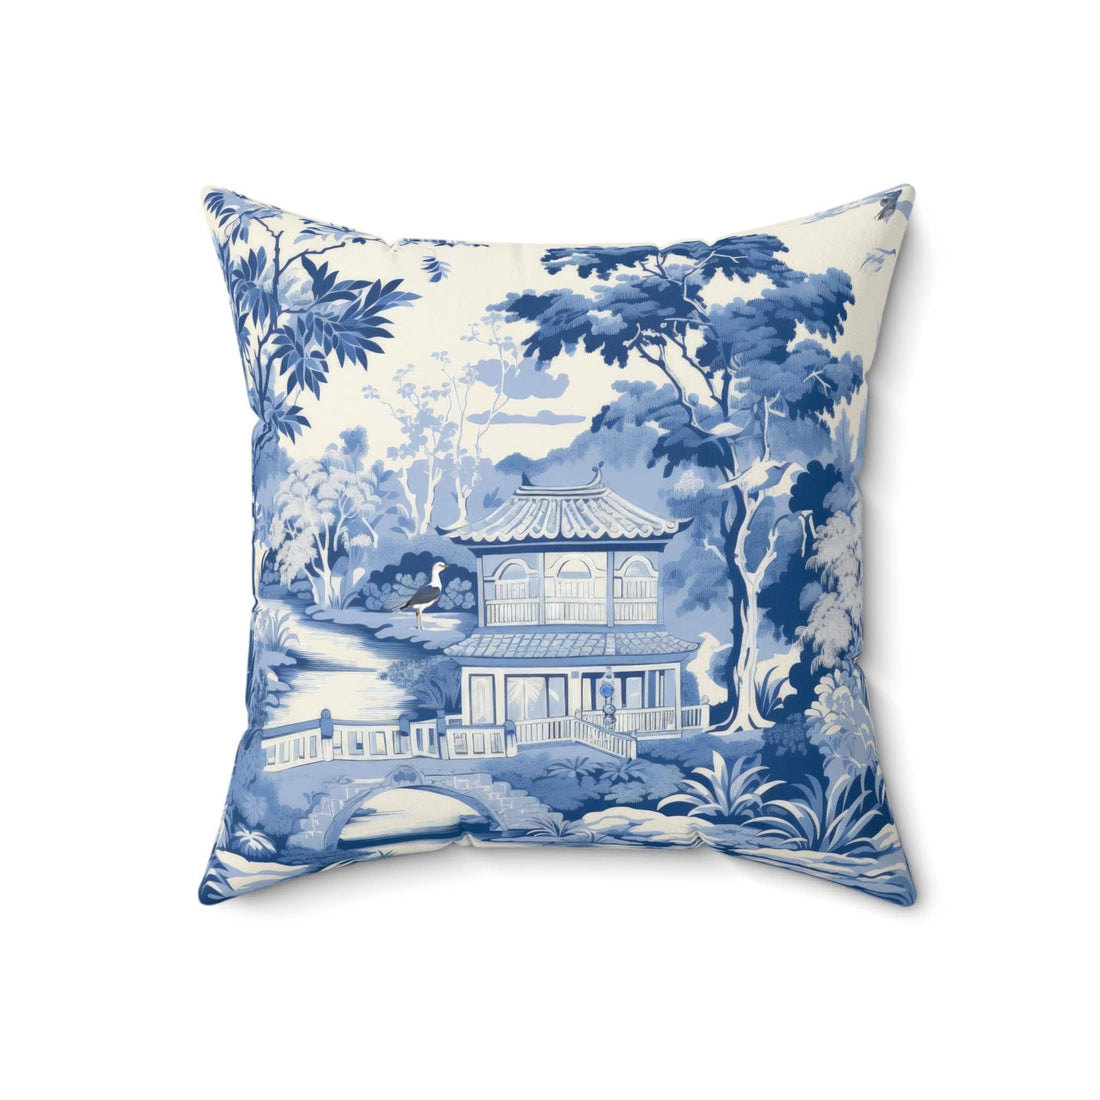 Kate McEnroe New York Chinoiserie Pagoda Floral Throw Pillow, Country Farmhouse Grandmillenial Cushion Covers, Rustic Chic Living Room, Bedroom Decor - 12038823Throw Pillows19813326156271432929